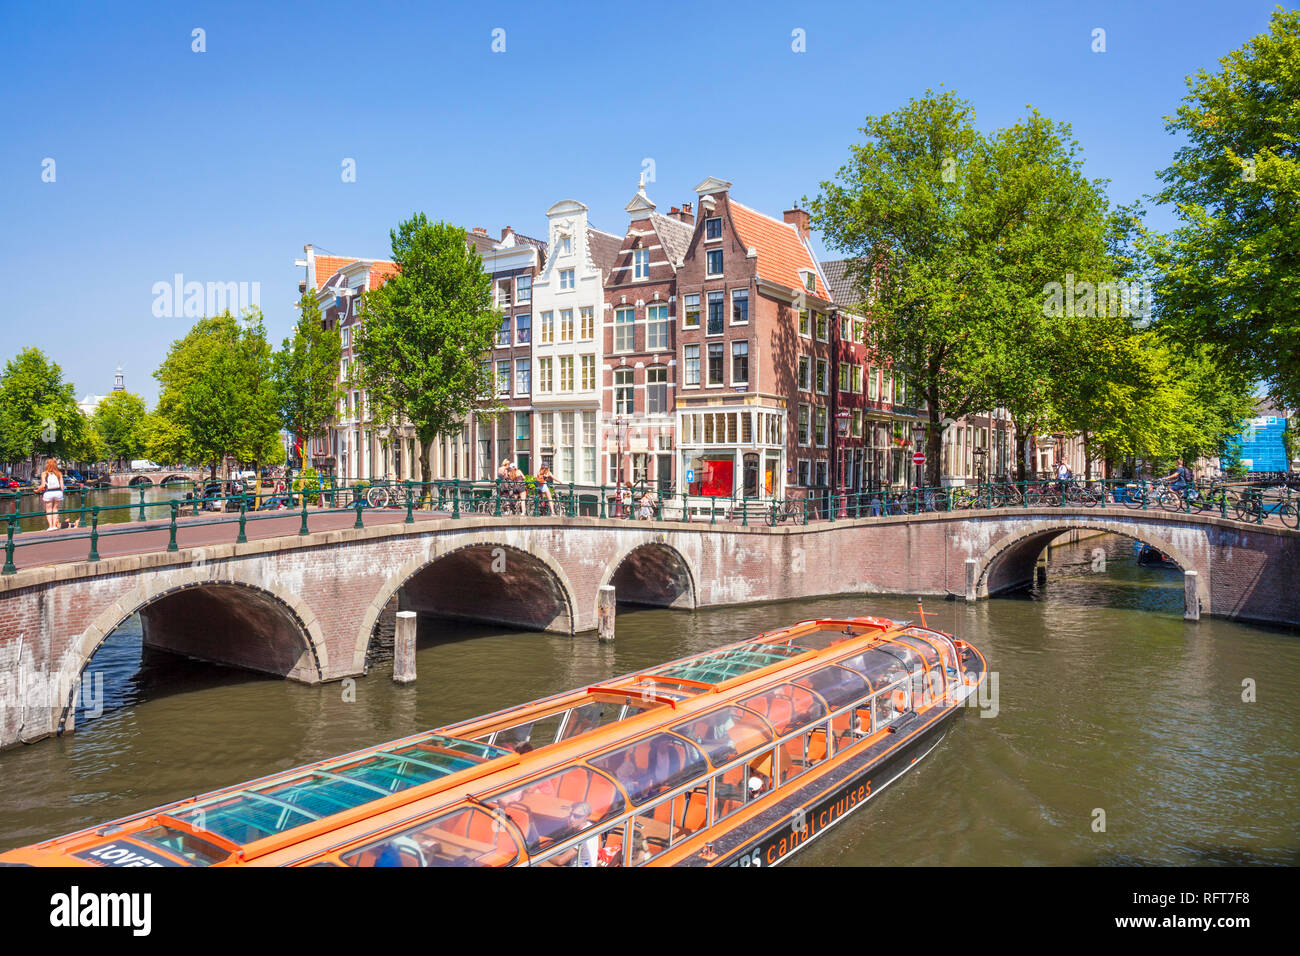 Canal tour boat and bridges at the junction of Leidsegracht Canal and Keizergracht Canal, Amsterdam, North Holland, Netherlands, Europe Stock Photo